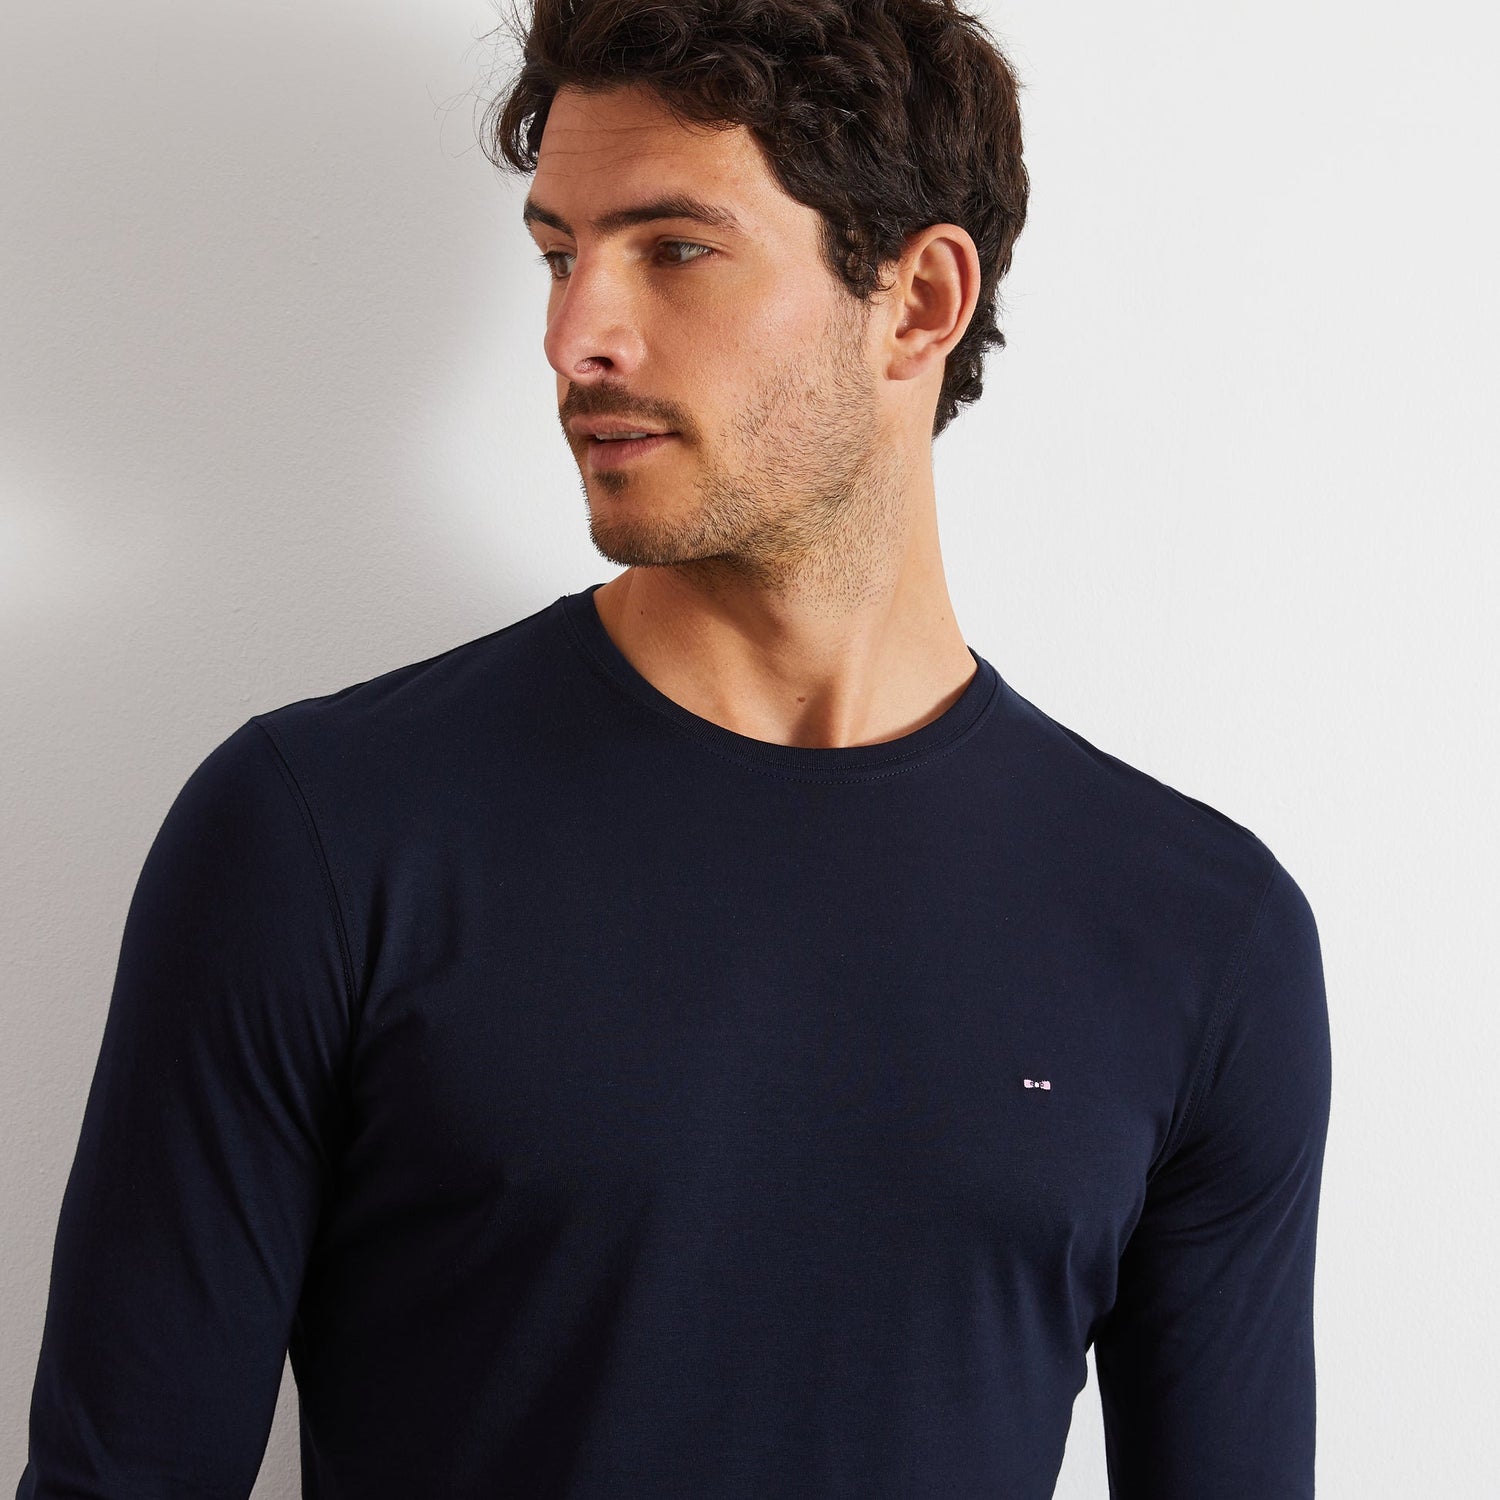 Long Sleeved Navy Blue Cotton T-Shirt_PPKNITLE0007_BLF_06